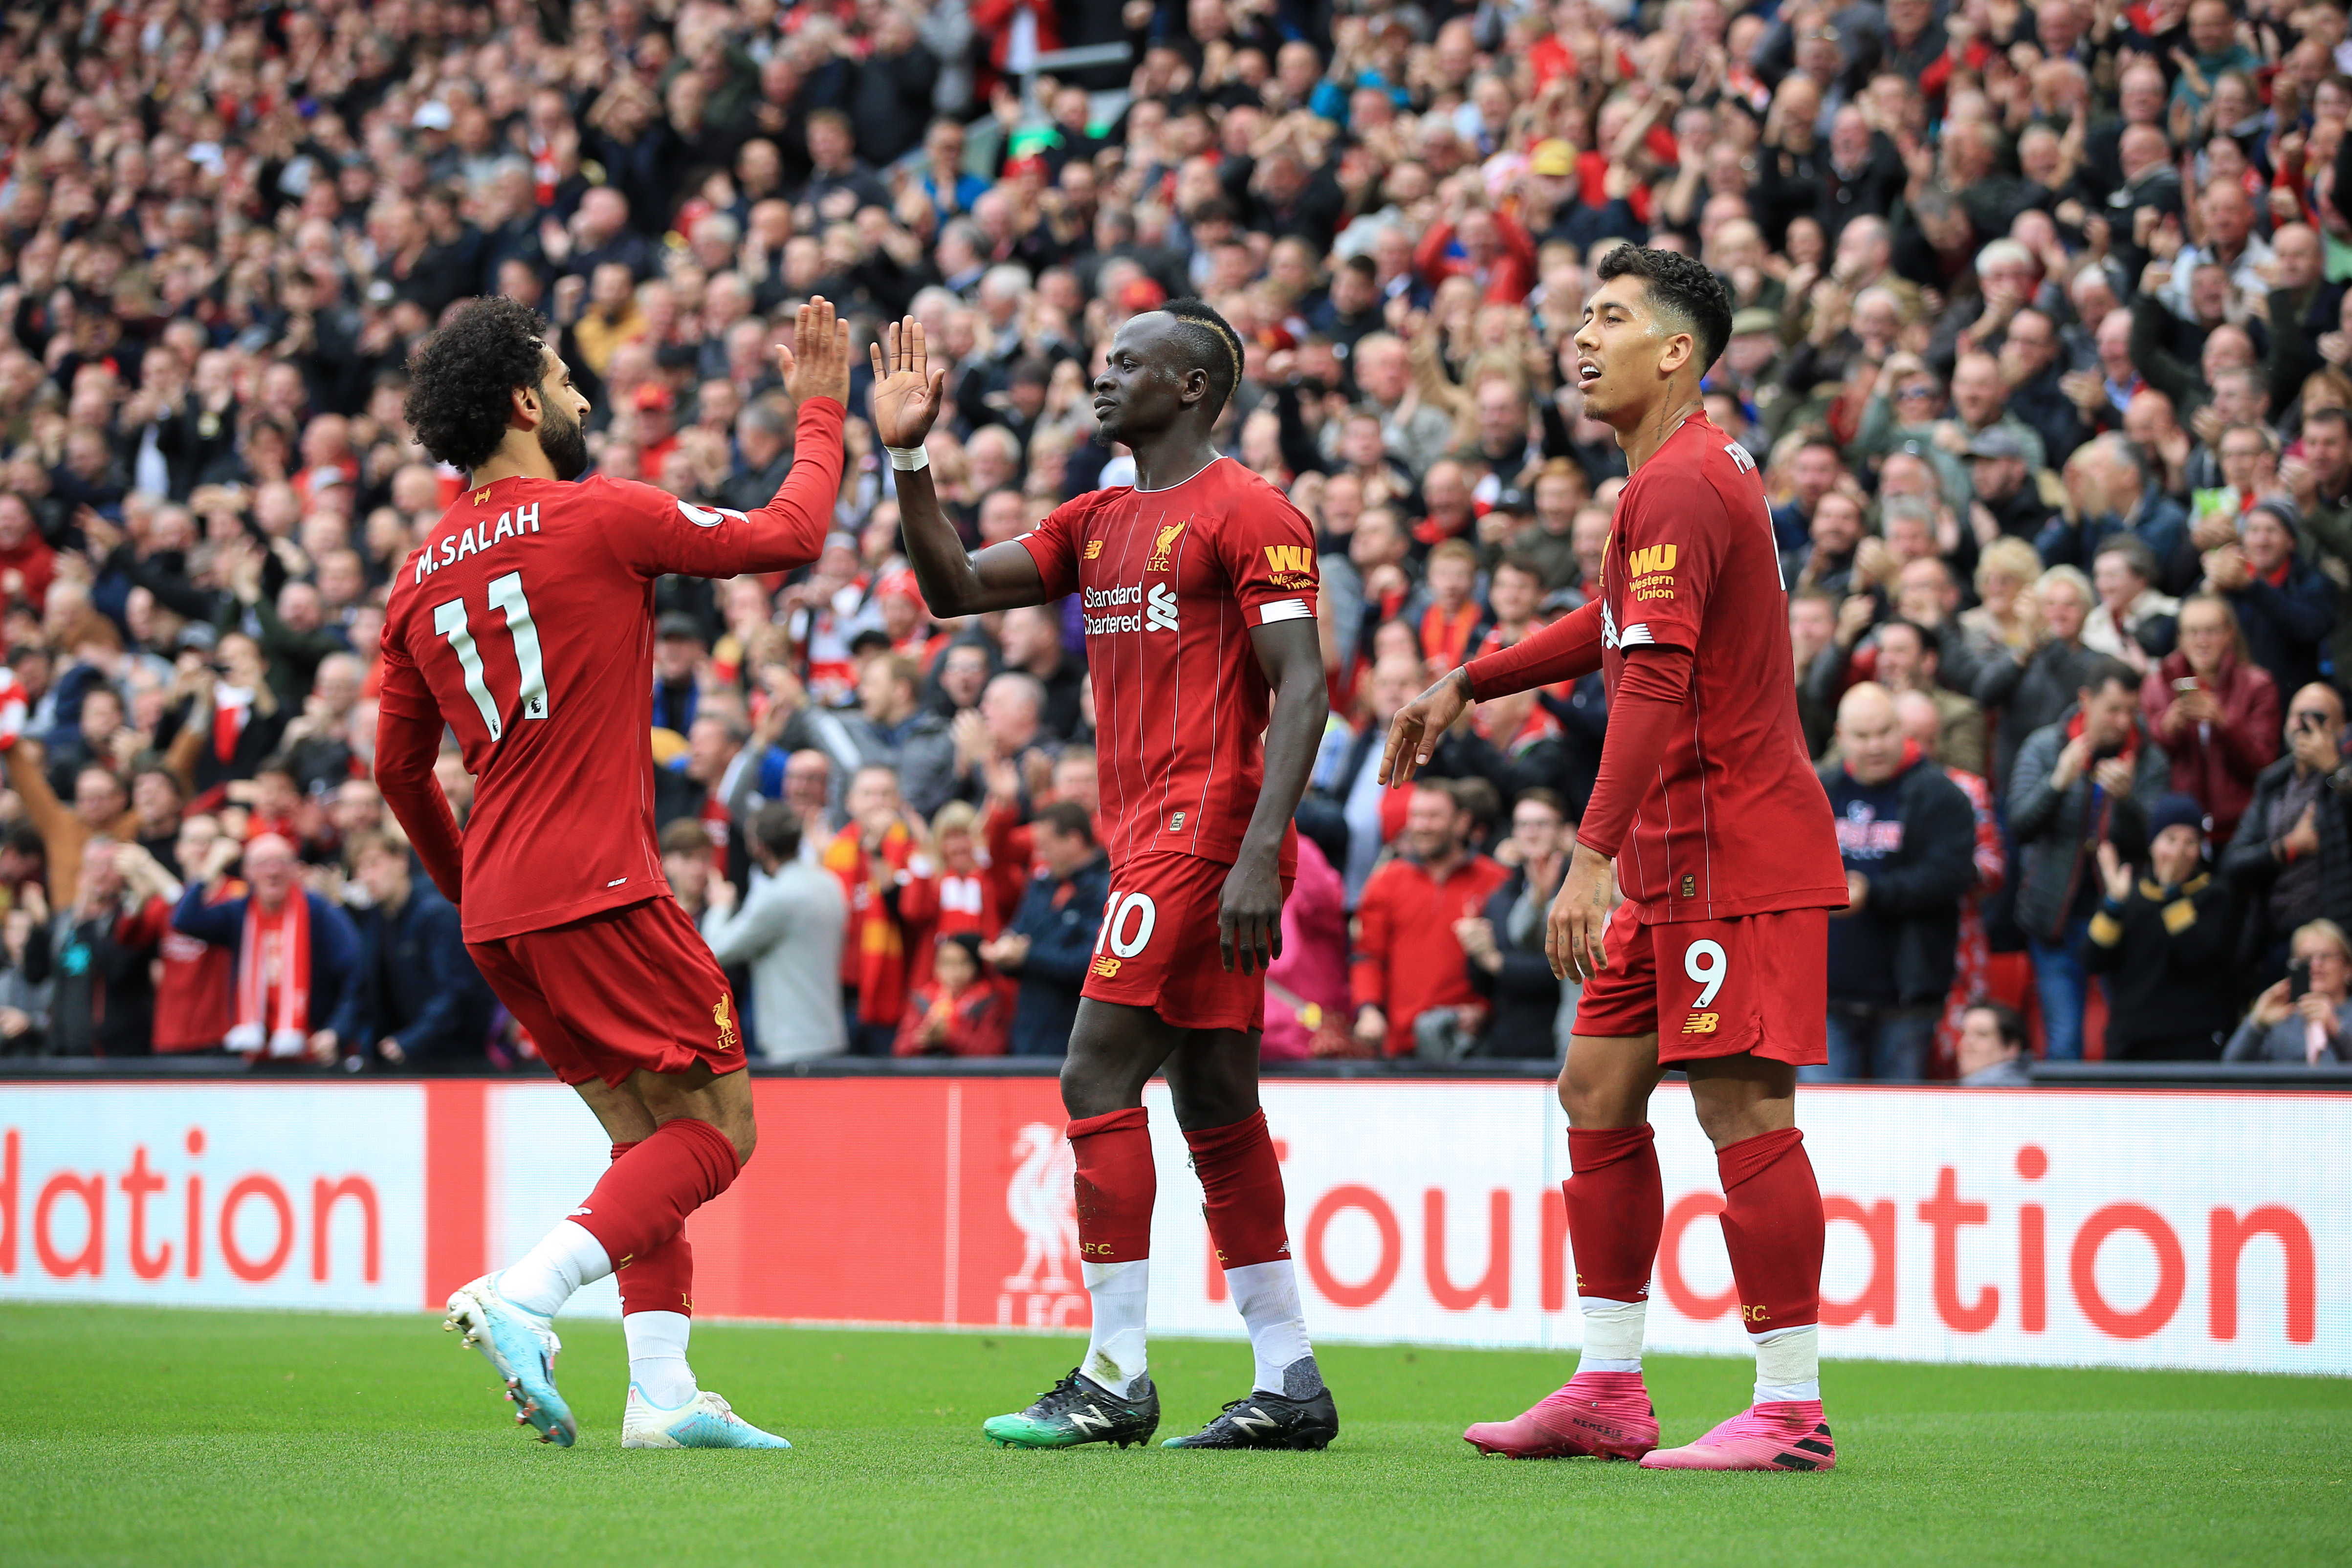 Sadio Mane, Mohamed Salah and Roberto Firmino have been in top form